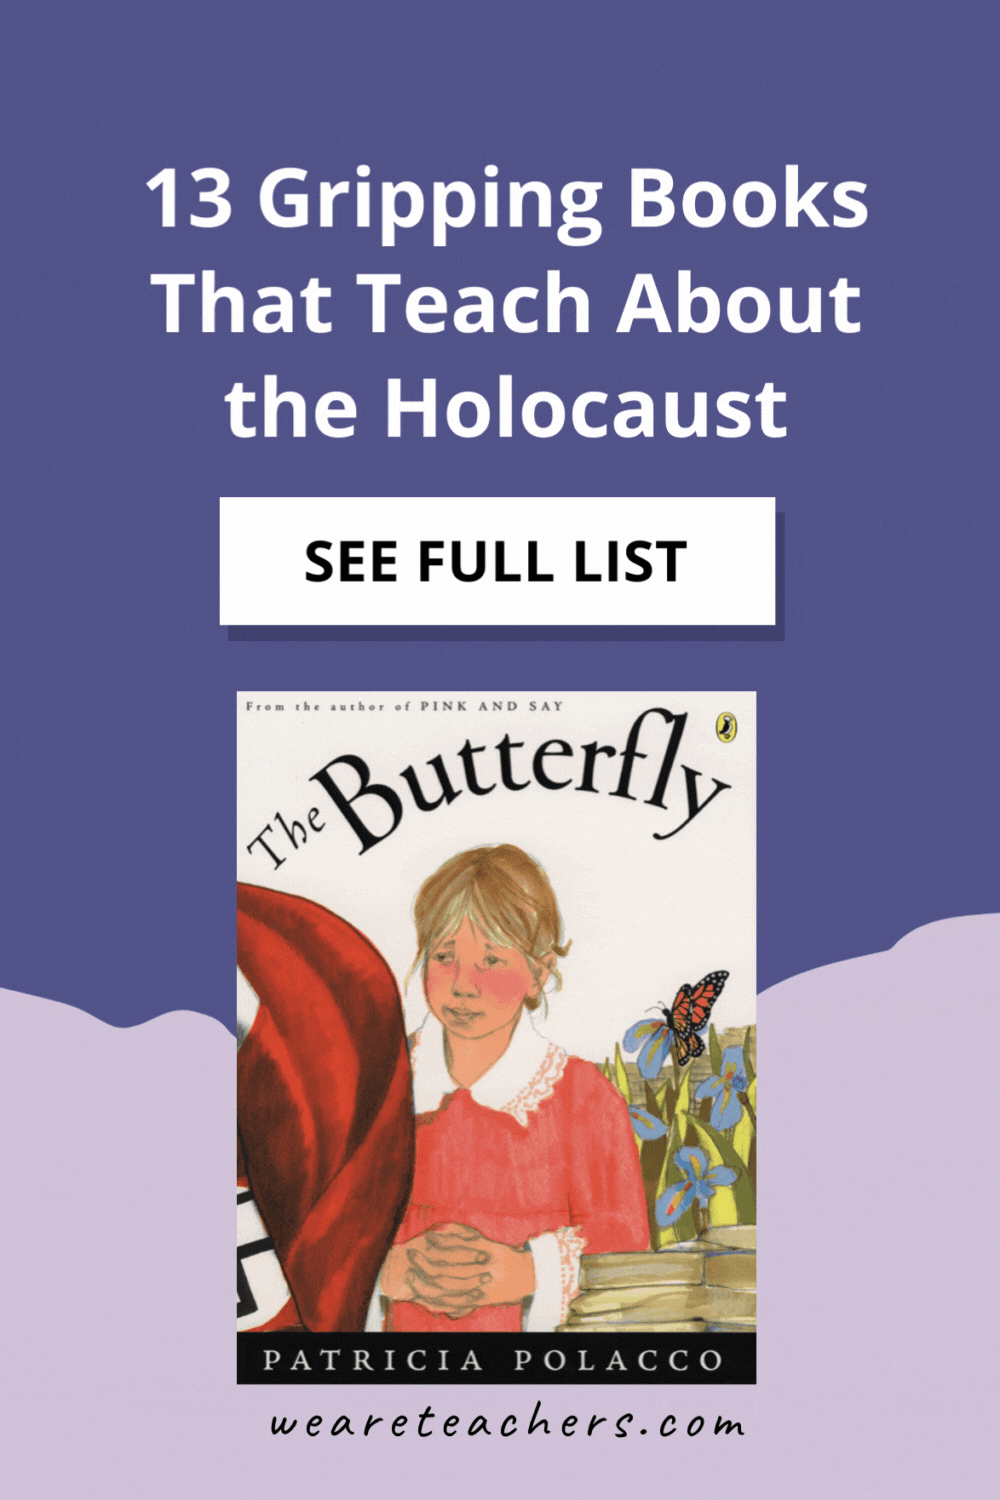 Educate both yourself and your students with these gripping books about the Holocaust curated for every age.